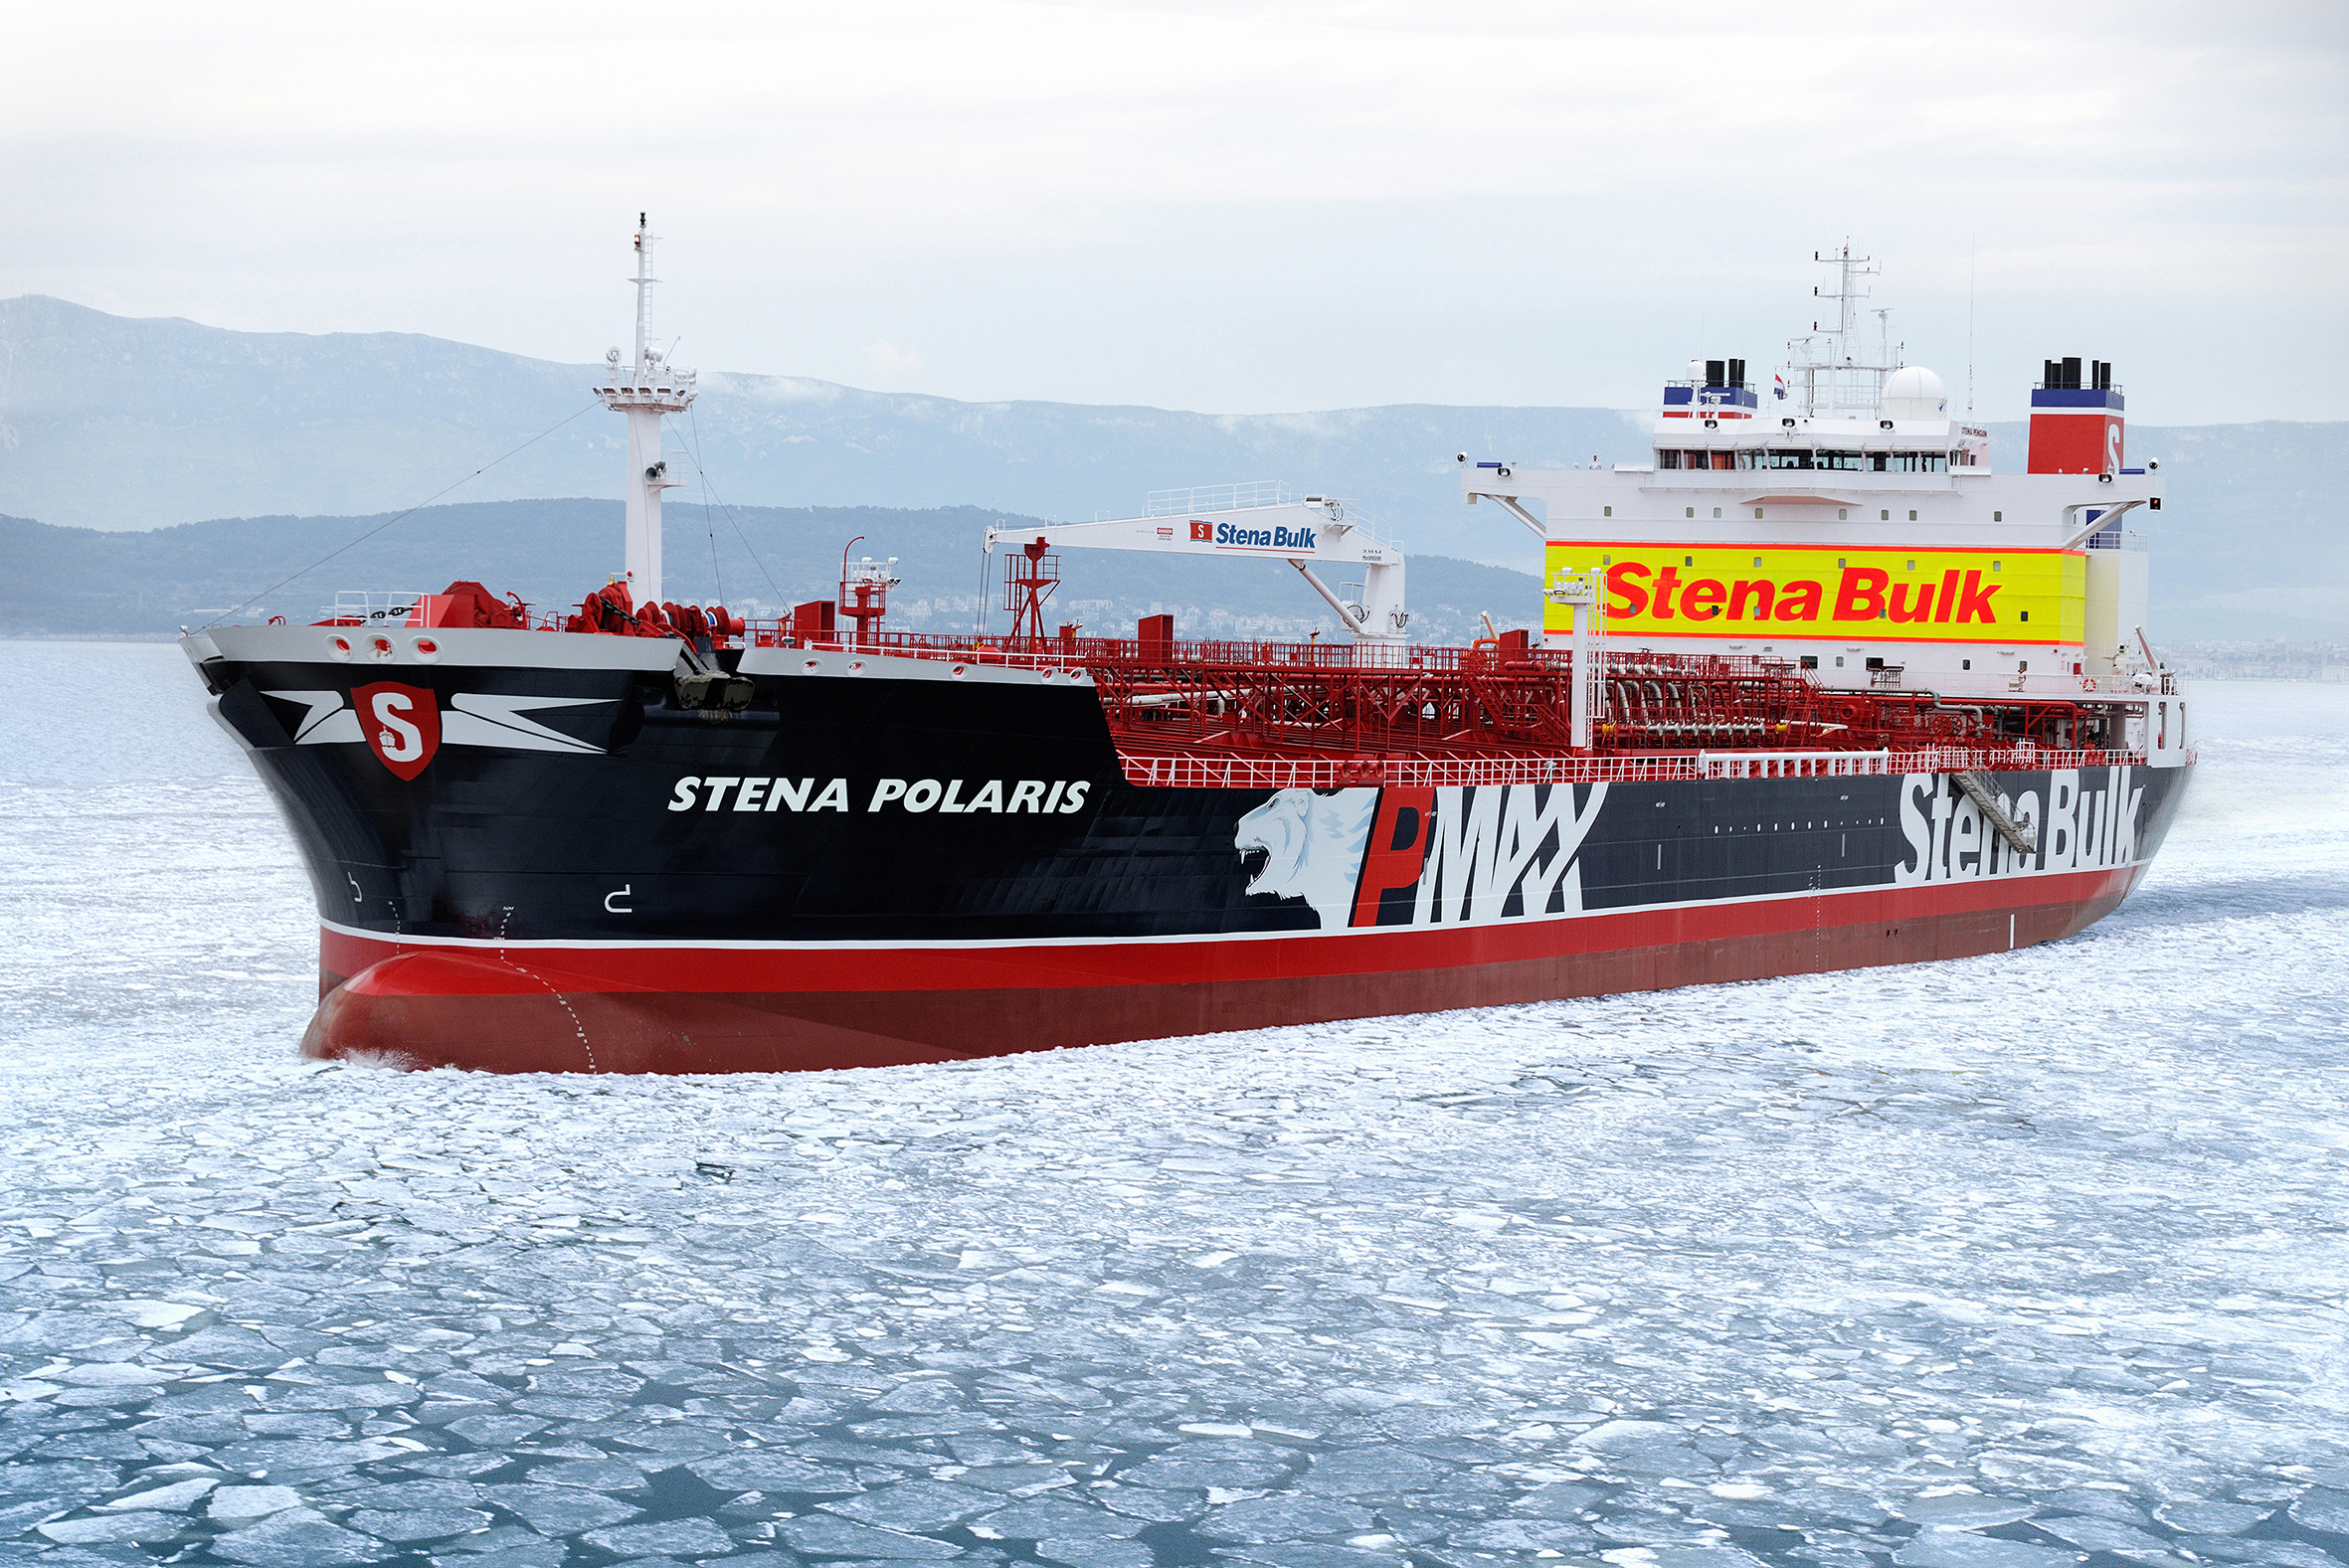 The first shipment of cargo from Europe to South Korea via the Northern Sea Route was in 2013, aboard the Swedish-owned ship Stena Polaris. (Stena Polaris)